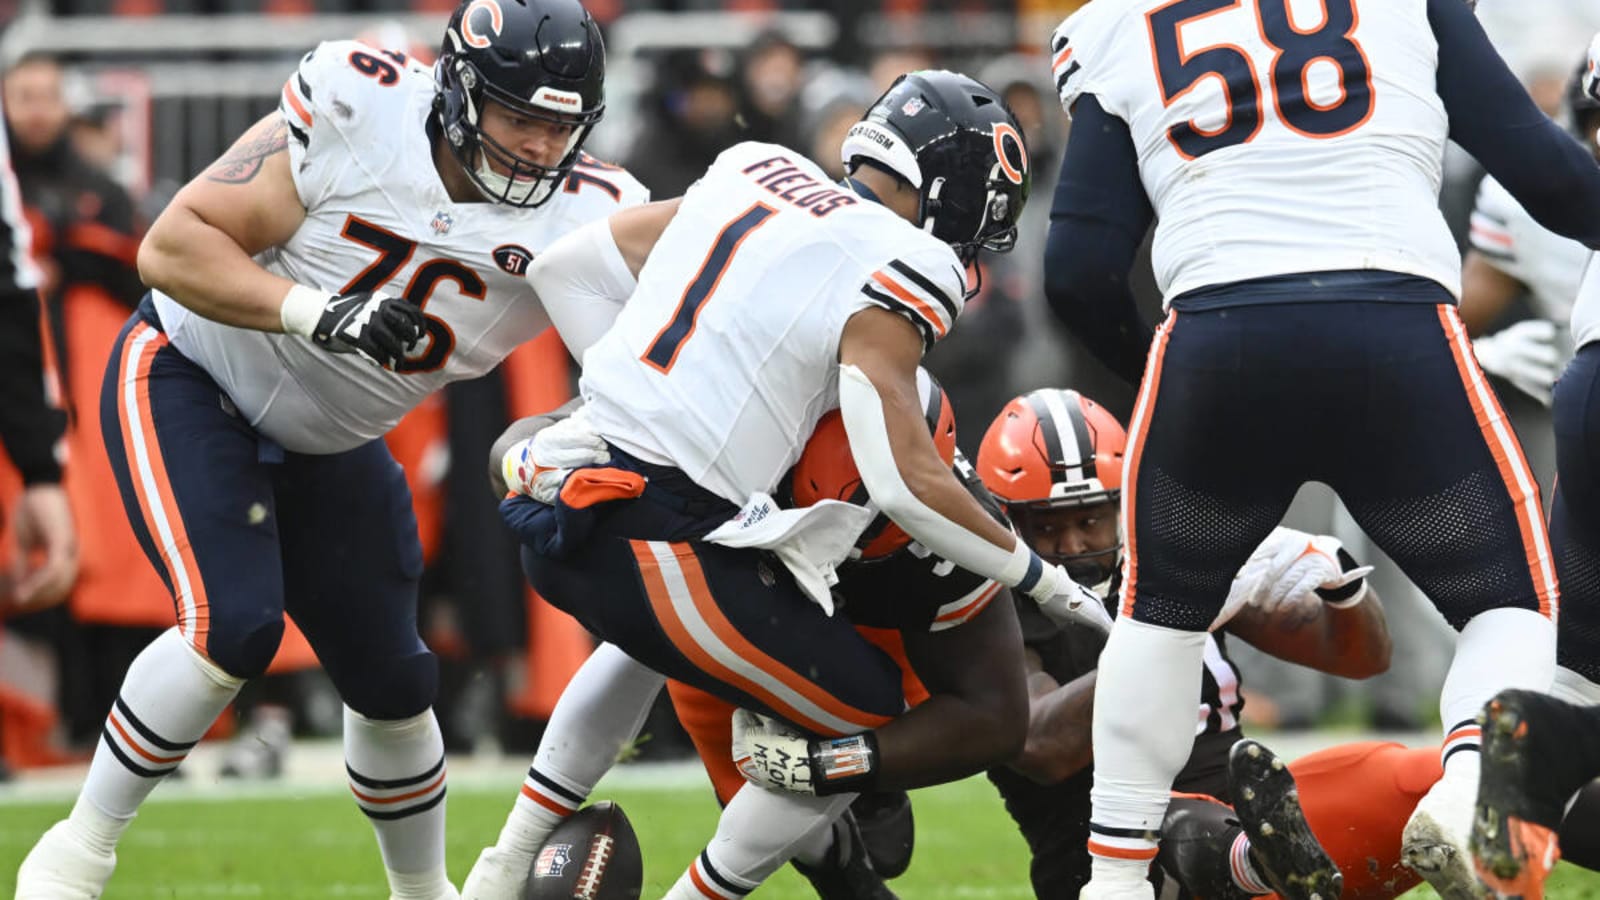 Bears starter still in concussion protocol on Wednesday